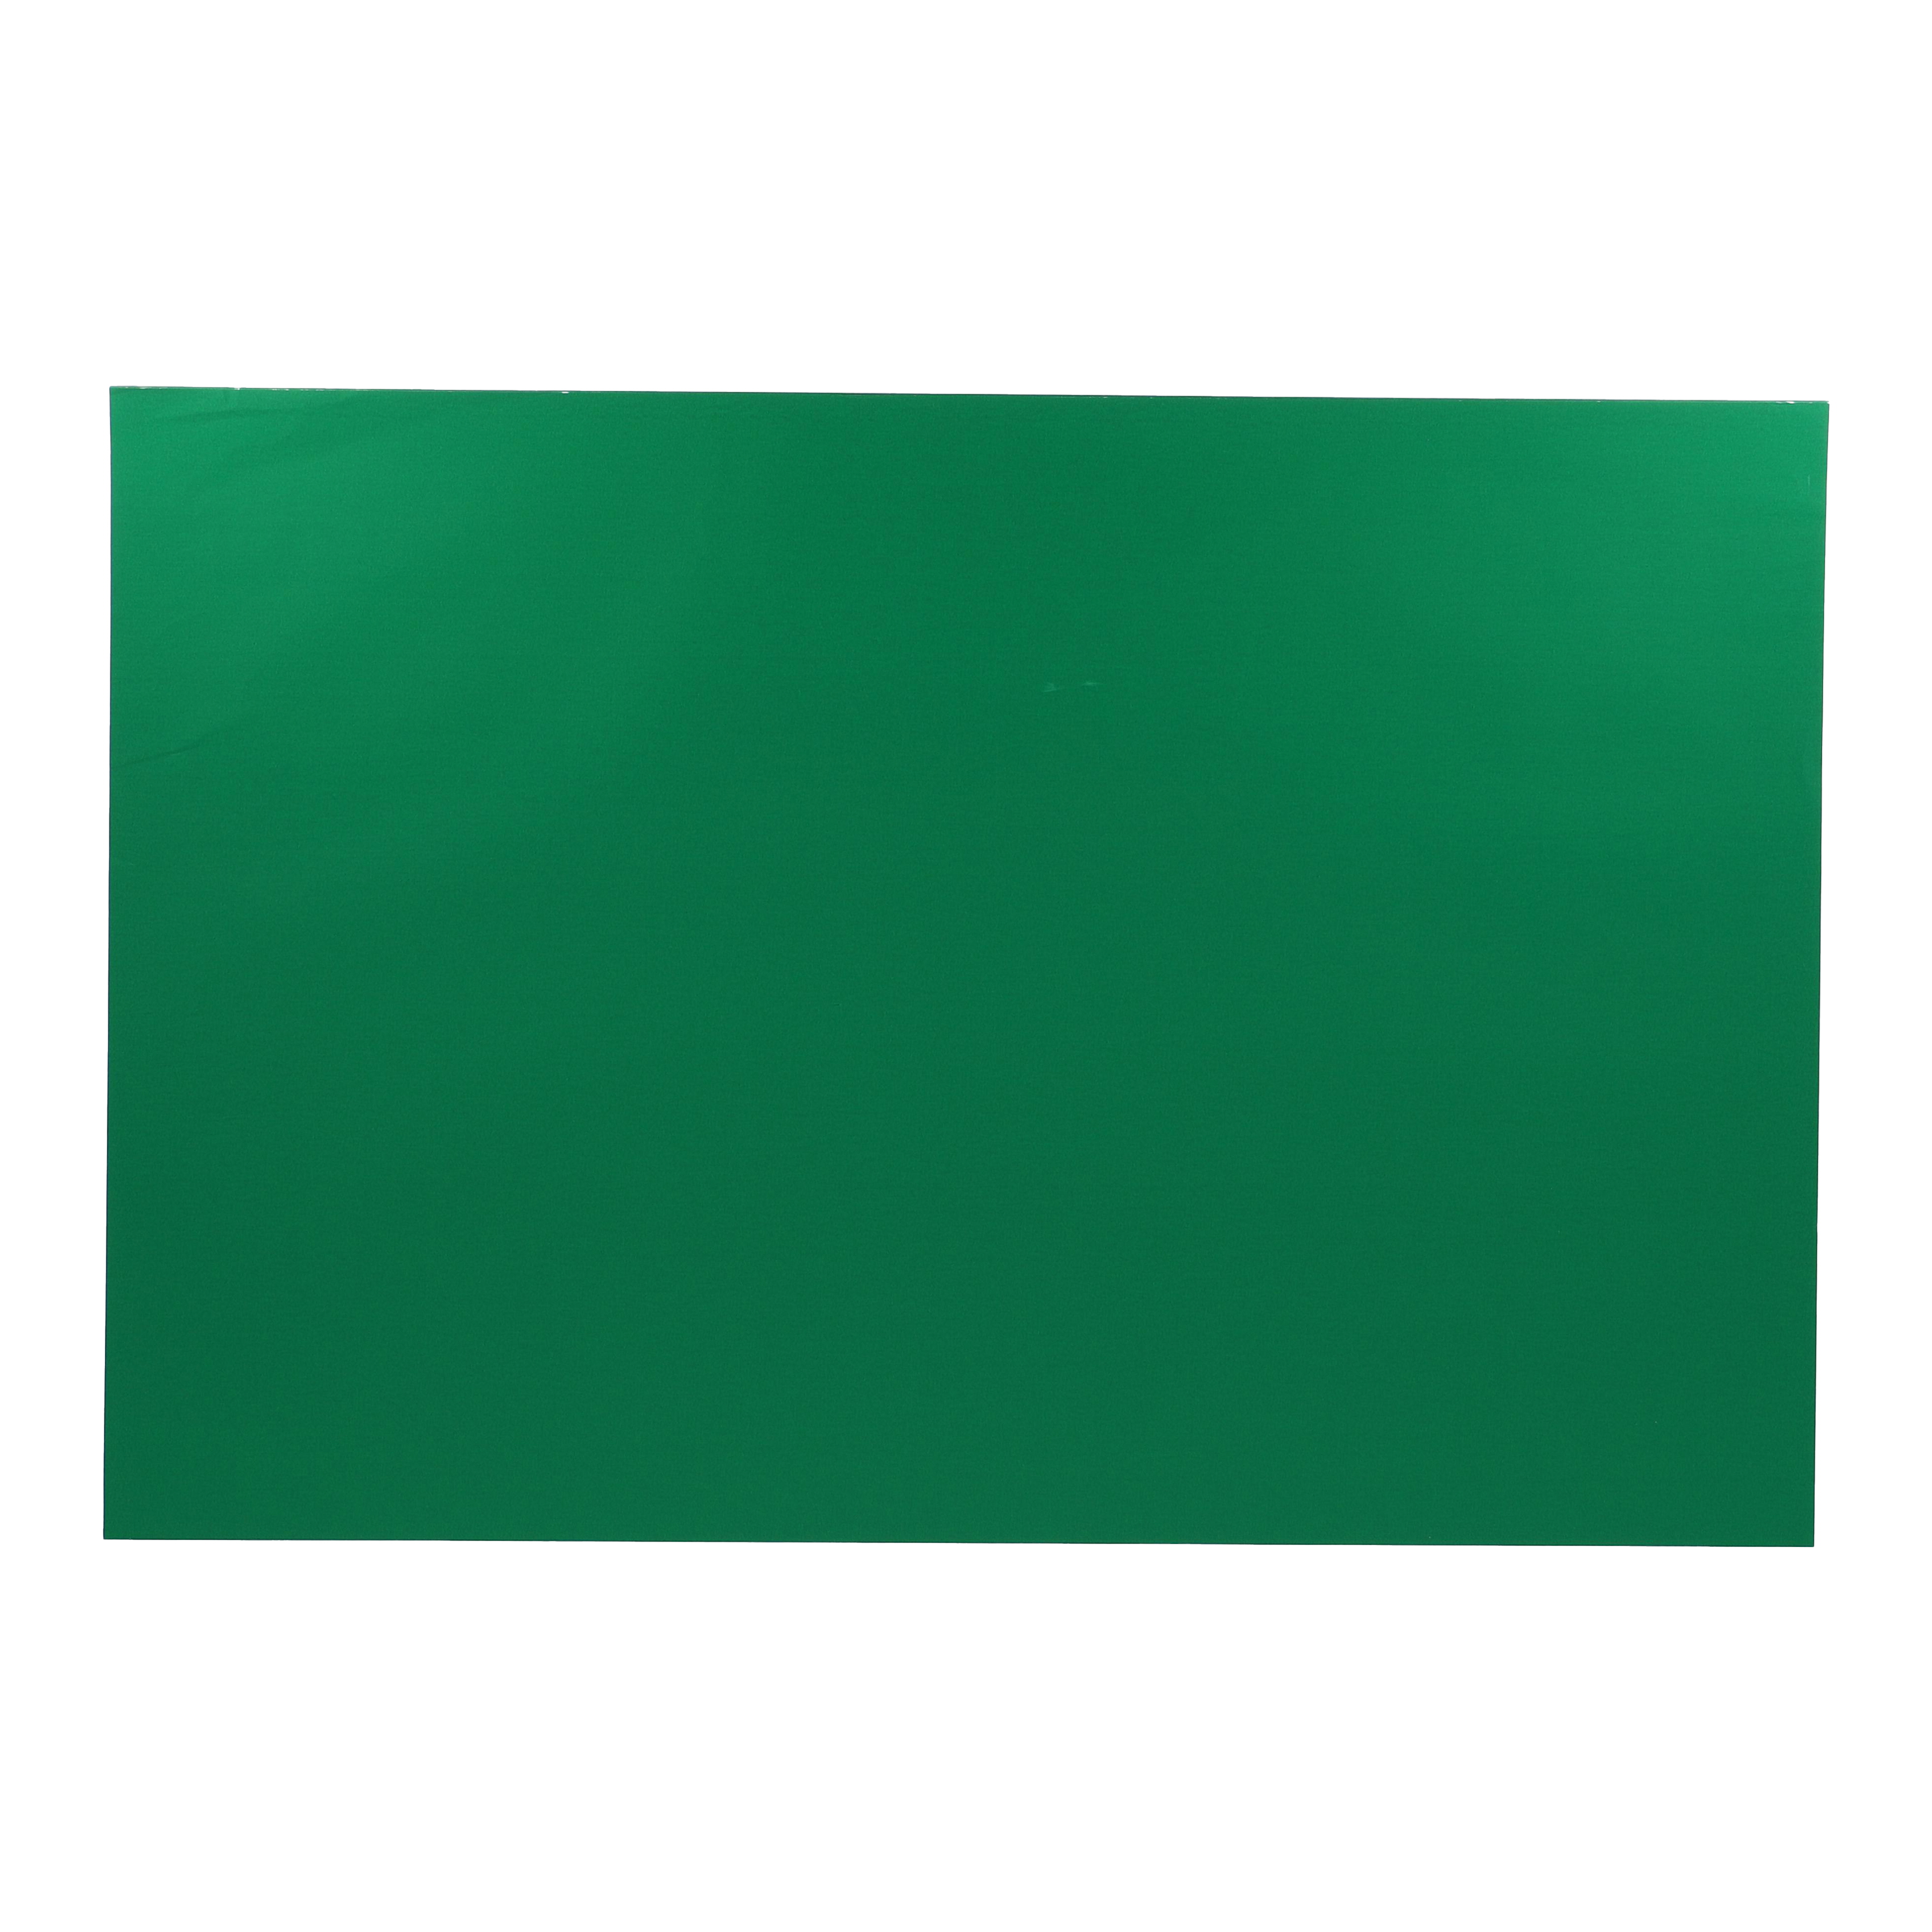 Cmate Smooth Coloured Paper Mid Green